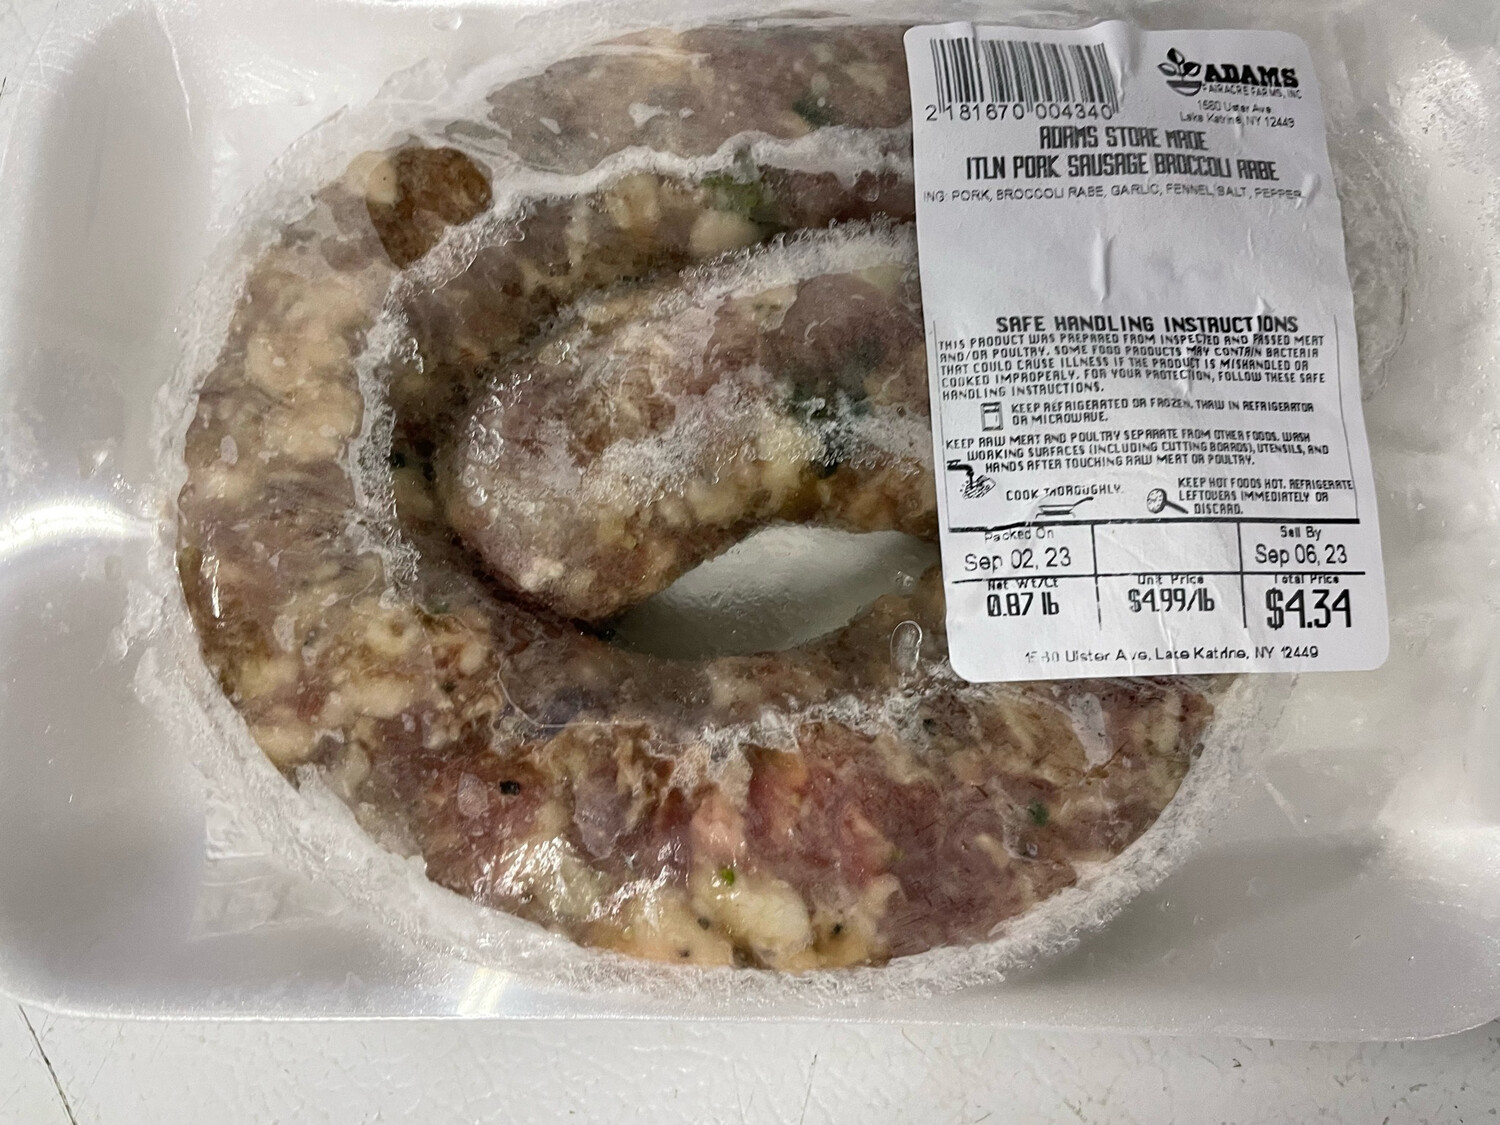 Sweet Italian Pork Sausage with Broccoli Rabe
**2 for 1 count!**